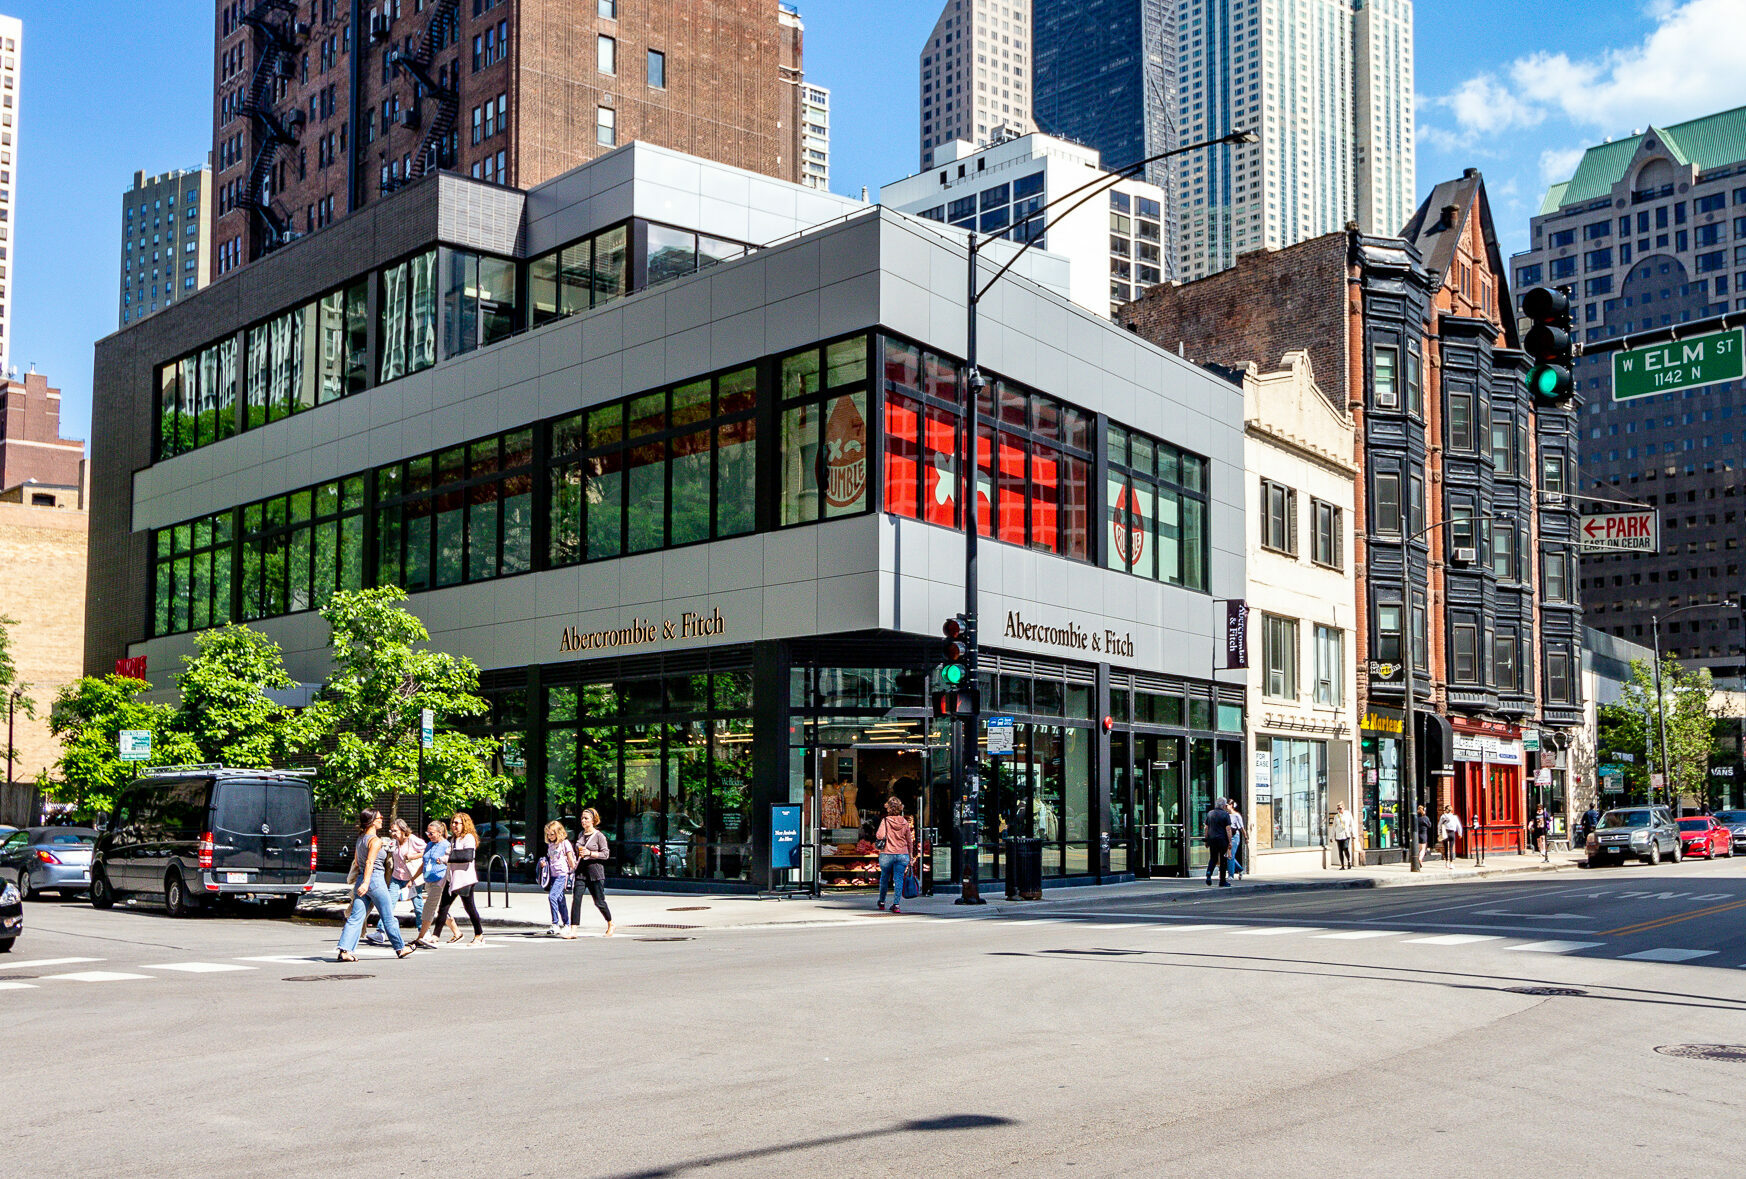 Multi-level retail building in the Gold Coast of Chicago